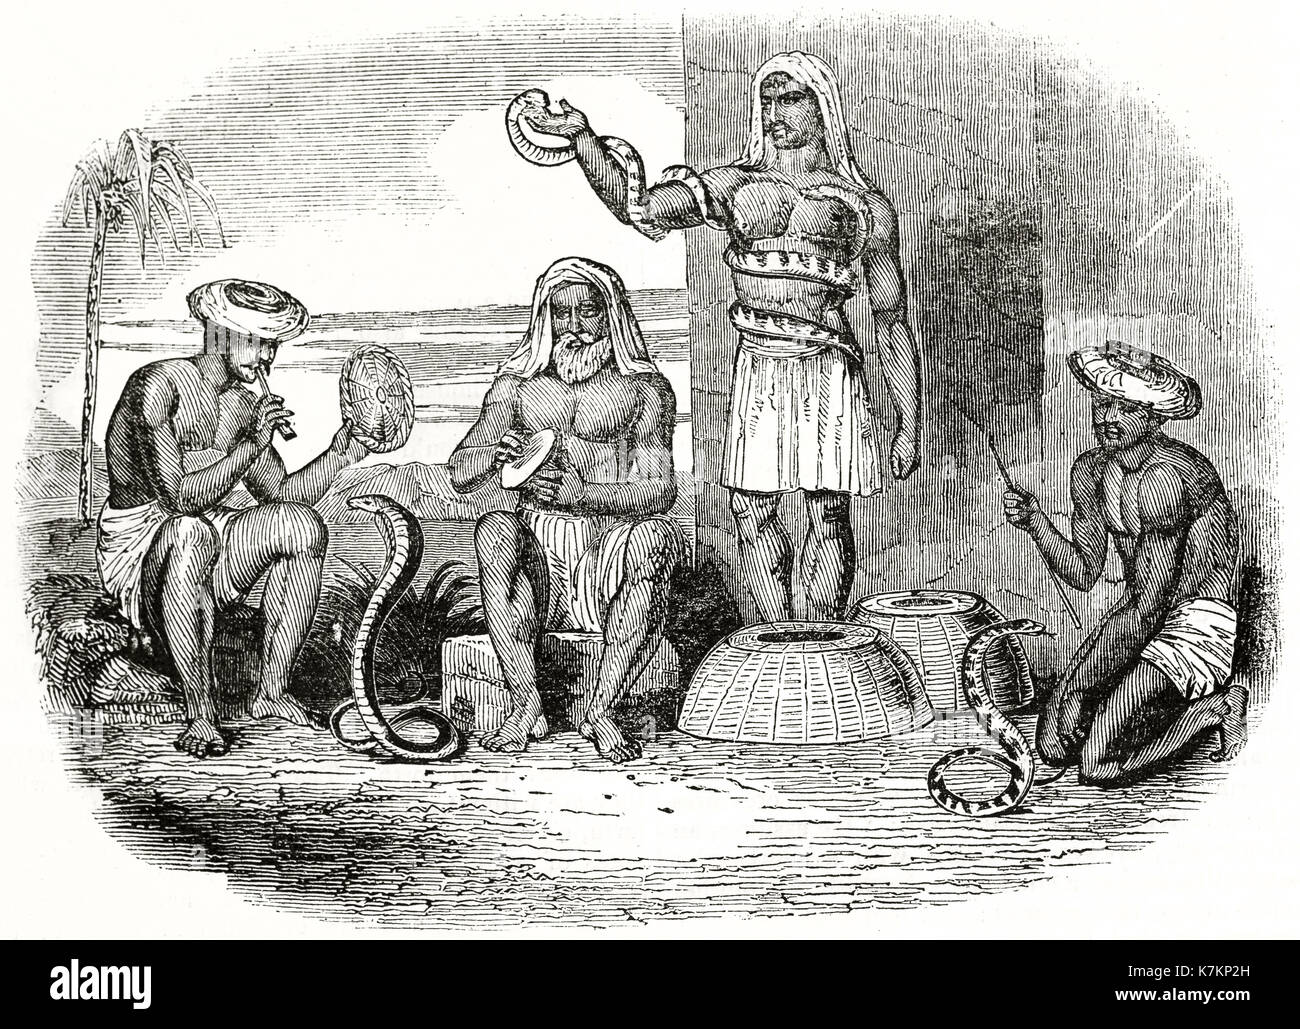 Old illustration of snake charmers in India. By unidentified author, publ. on The Penny Magazine, London, 1837 Stock Photo